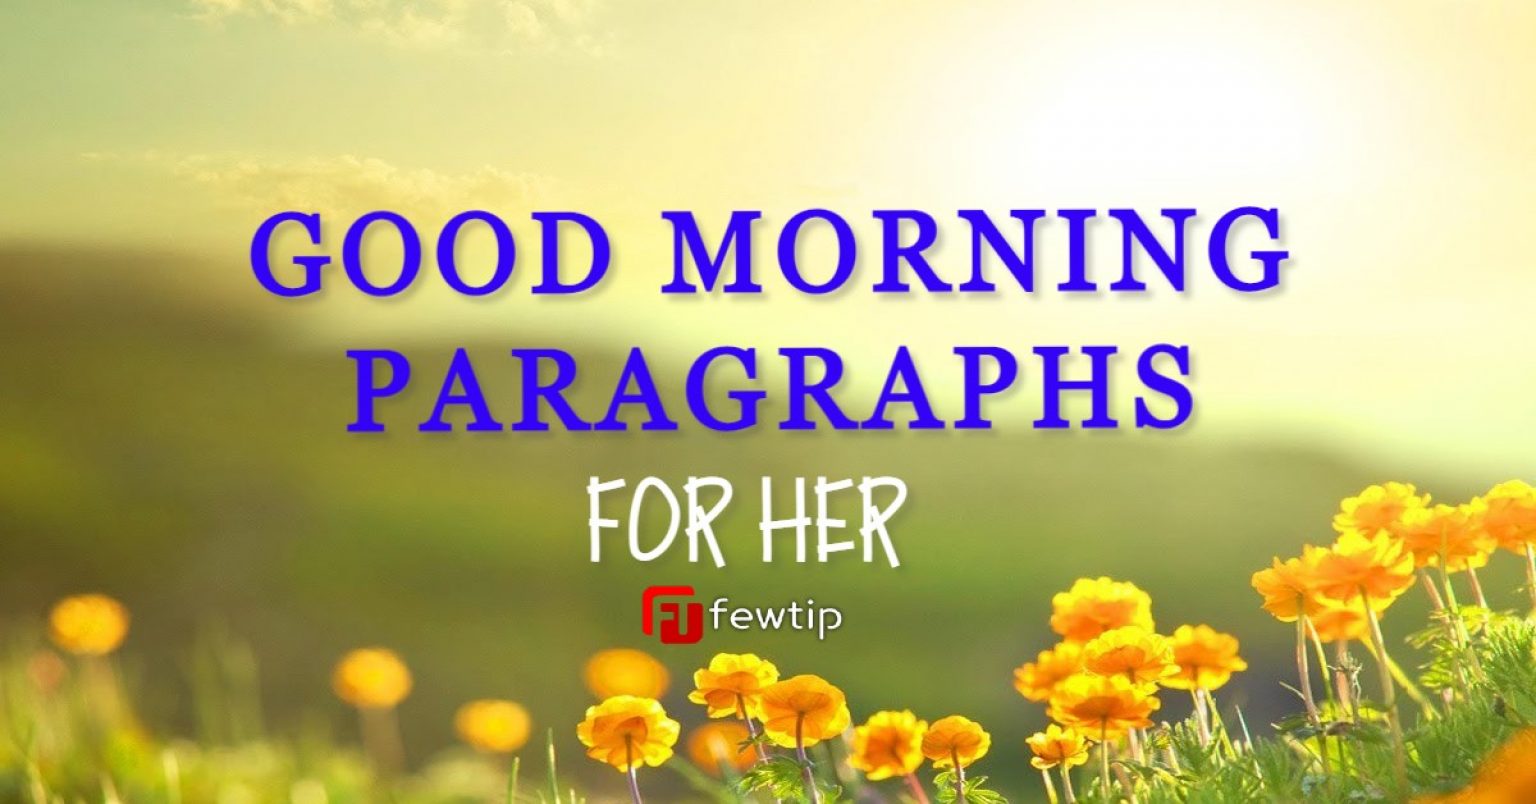 Good Morning Paragraphs For Her 1536x804 